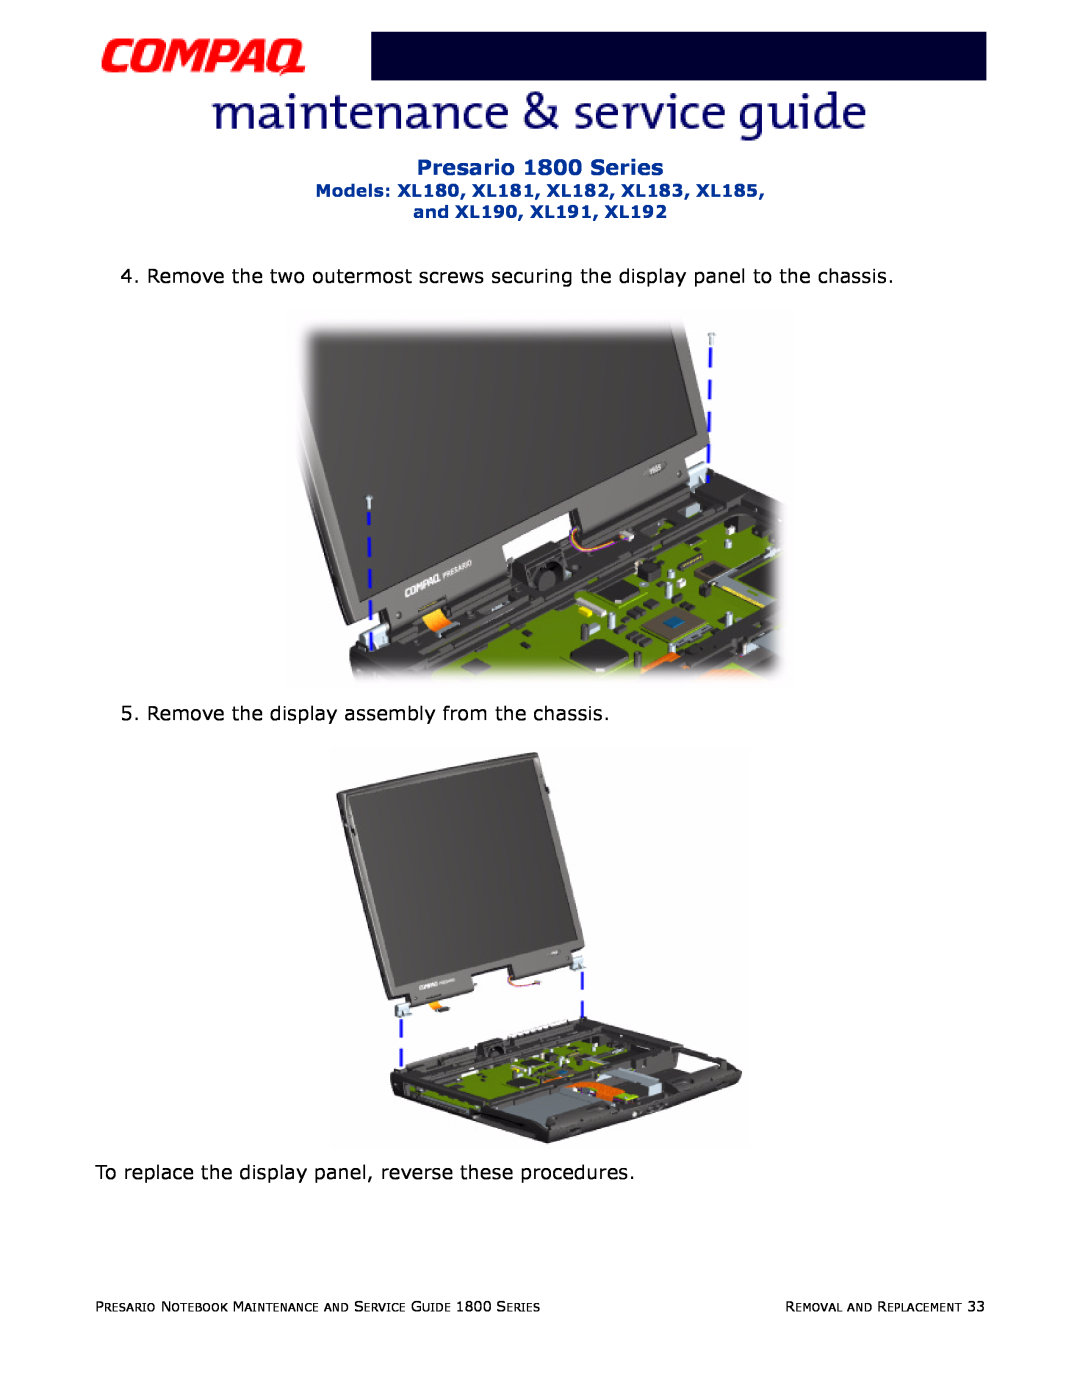 Compaq XL185, XL190, XL180 Presario 1800 Series, Remove the display assembly from the chassis, Removal And Replacement 